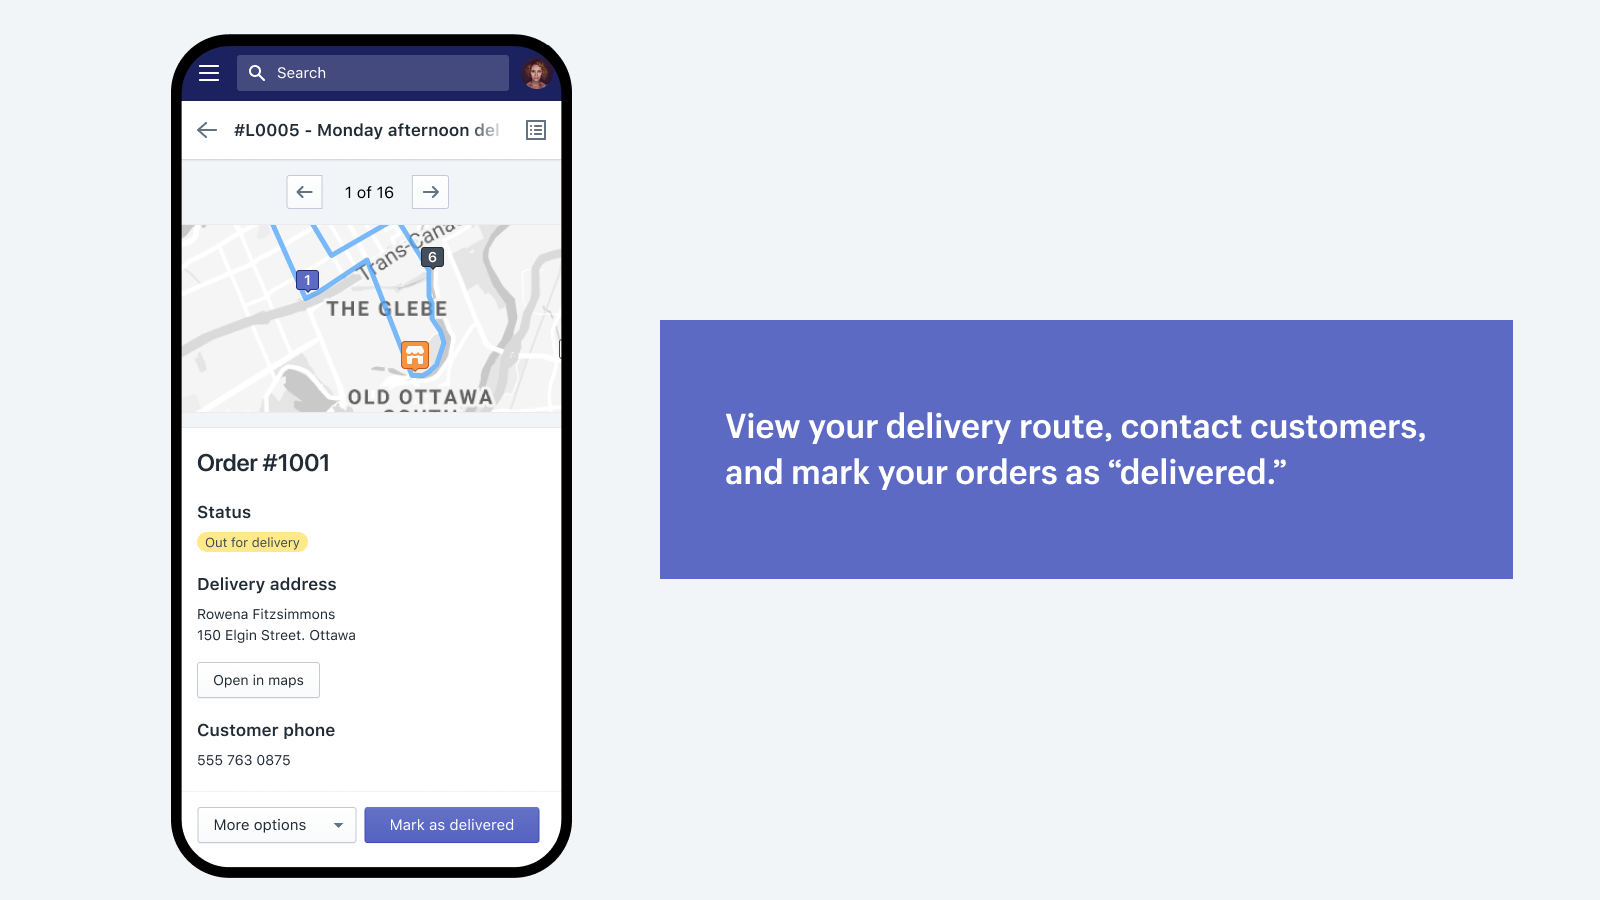 View delivery route, contact customers, and manage order status